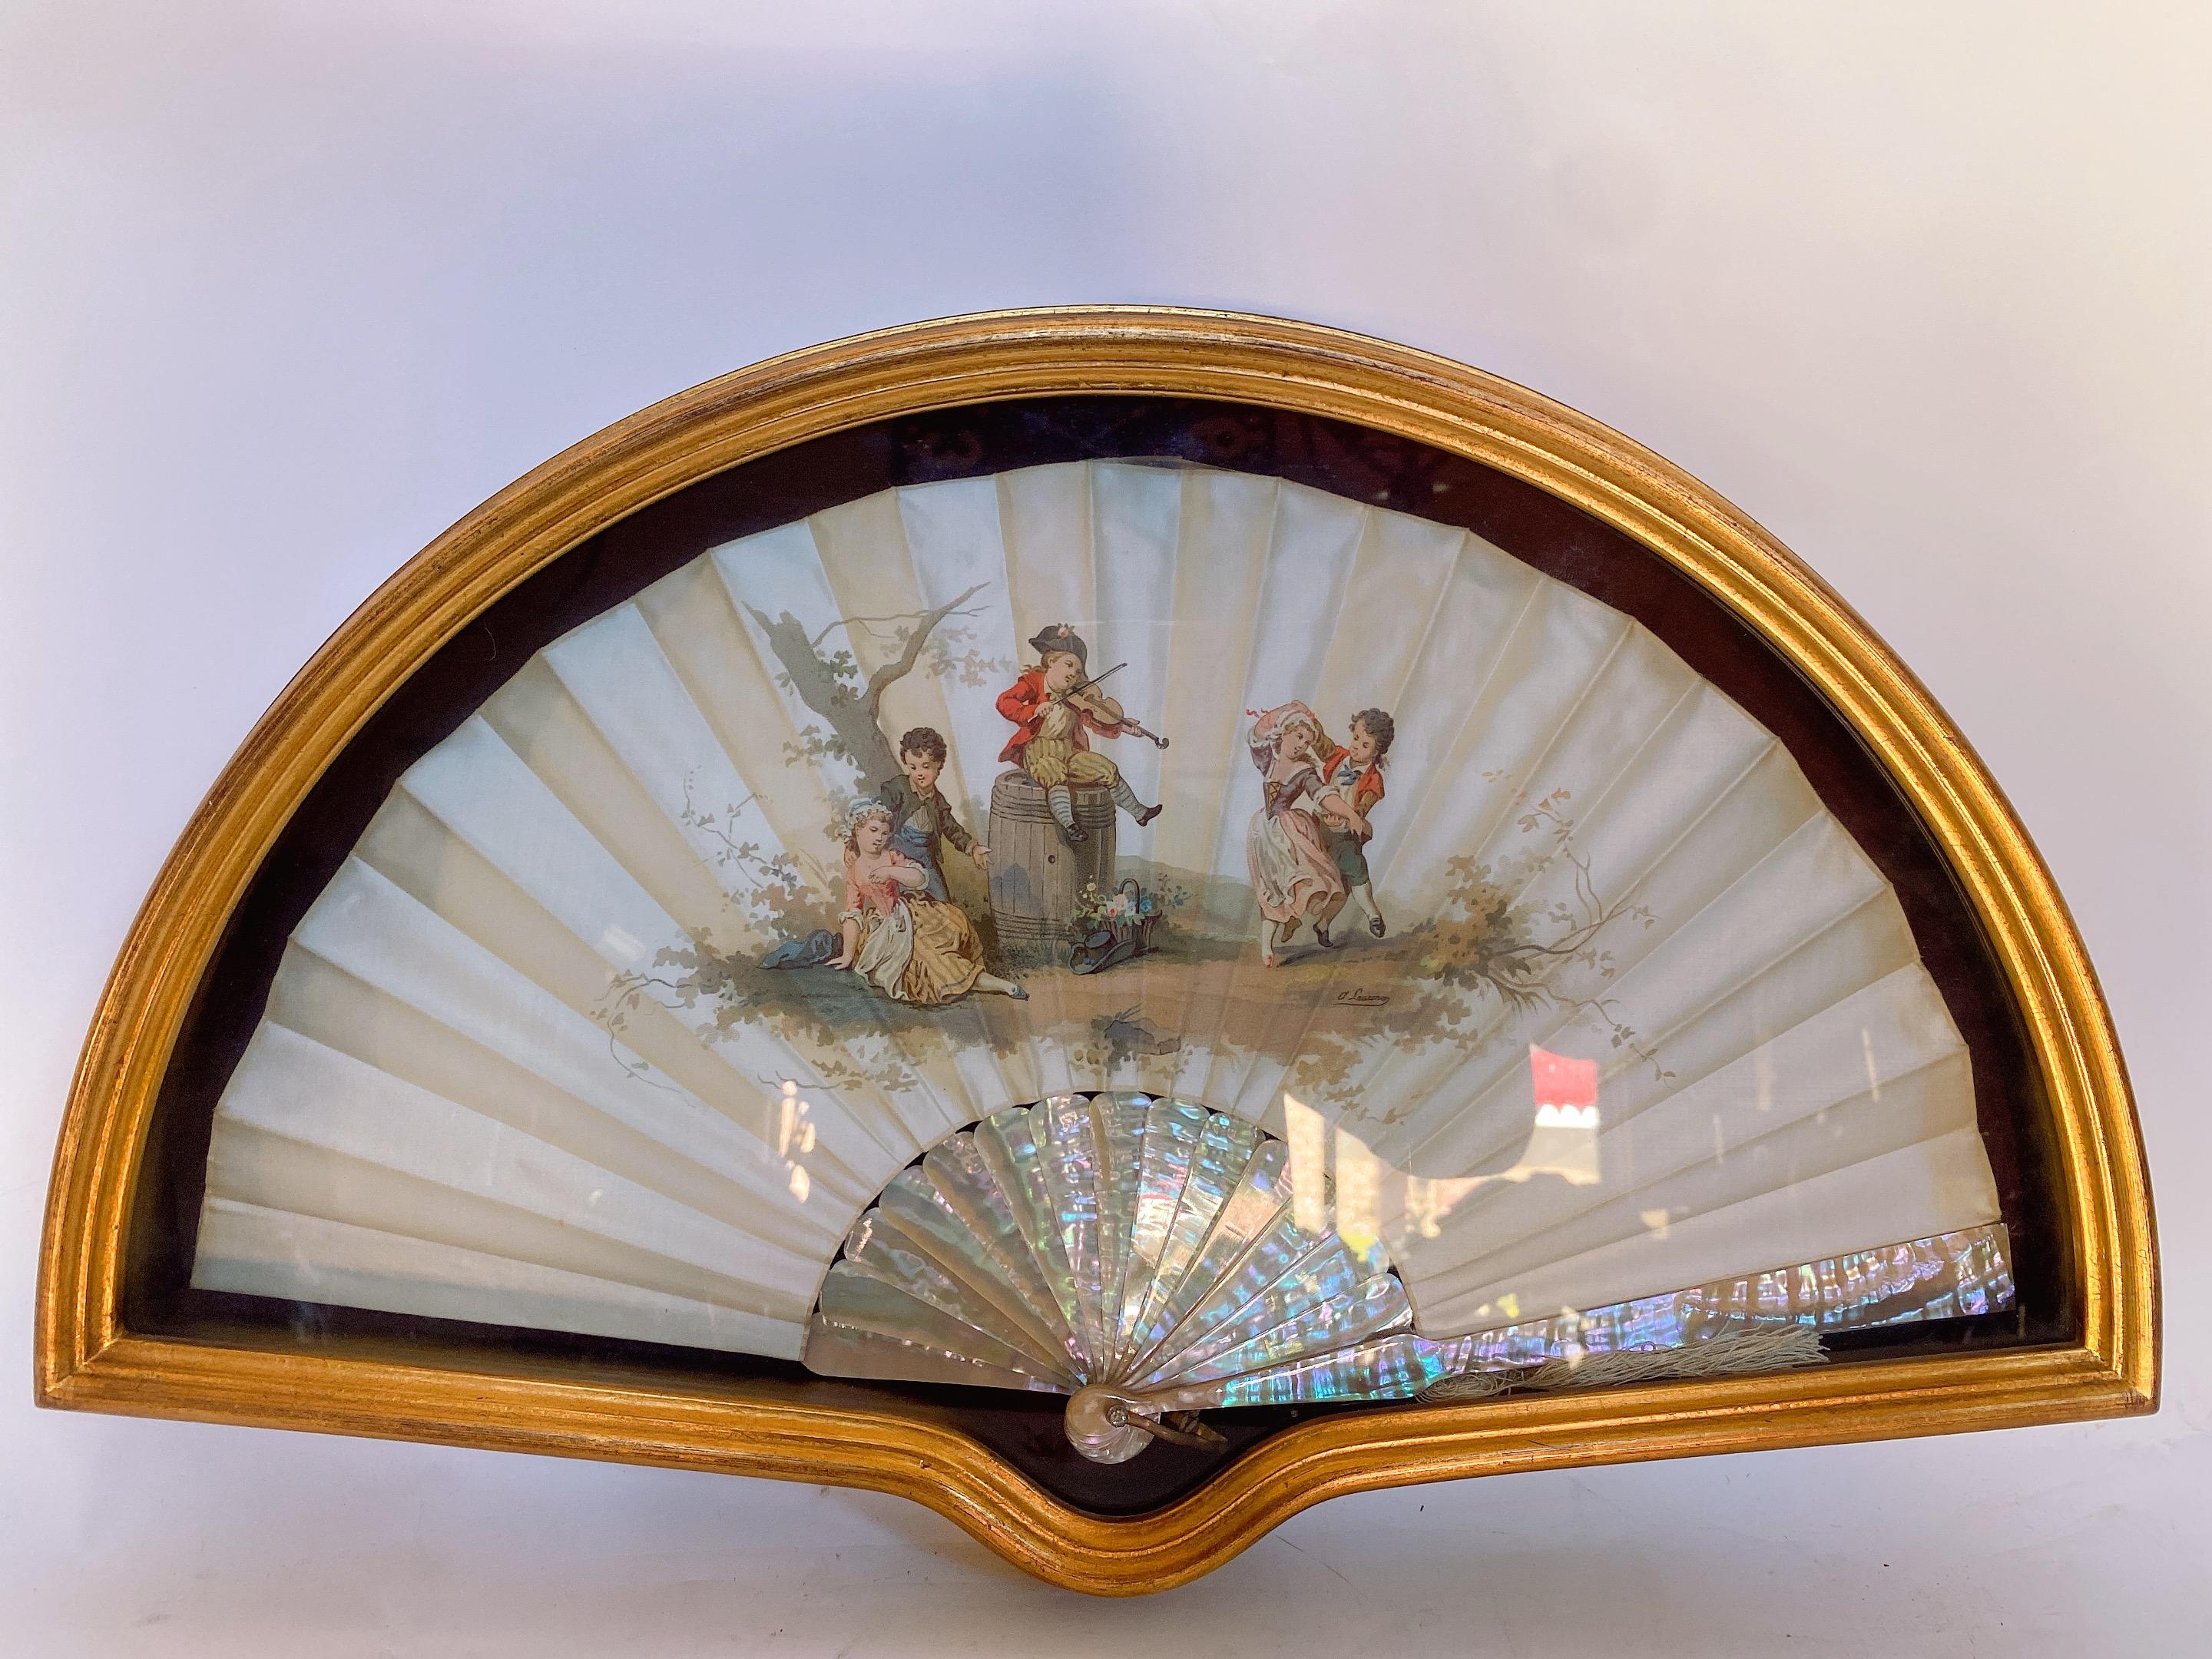 19th Century French painted silk of mother of pearl fan, shadow-box framed antique ladies fan, made of mother of pearl with gold leaf on the outer edge. The mother of pearl sticks have etched brass inlaid into them in the shapes of flowers. Overall